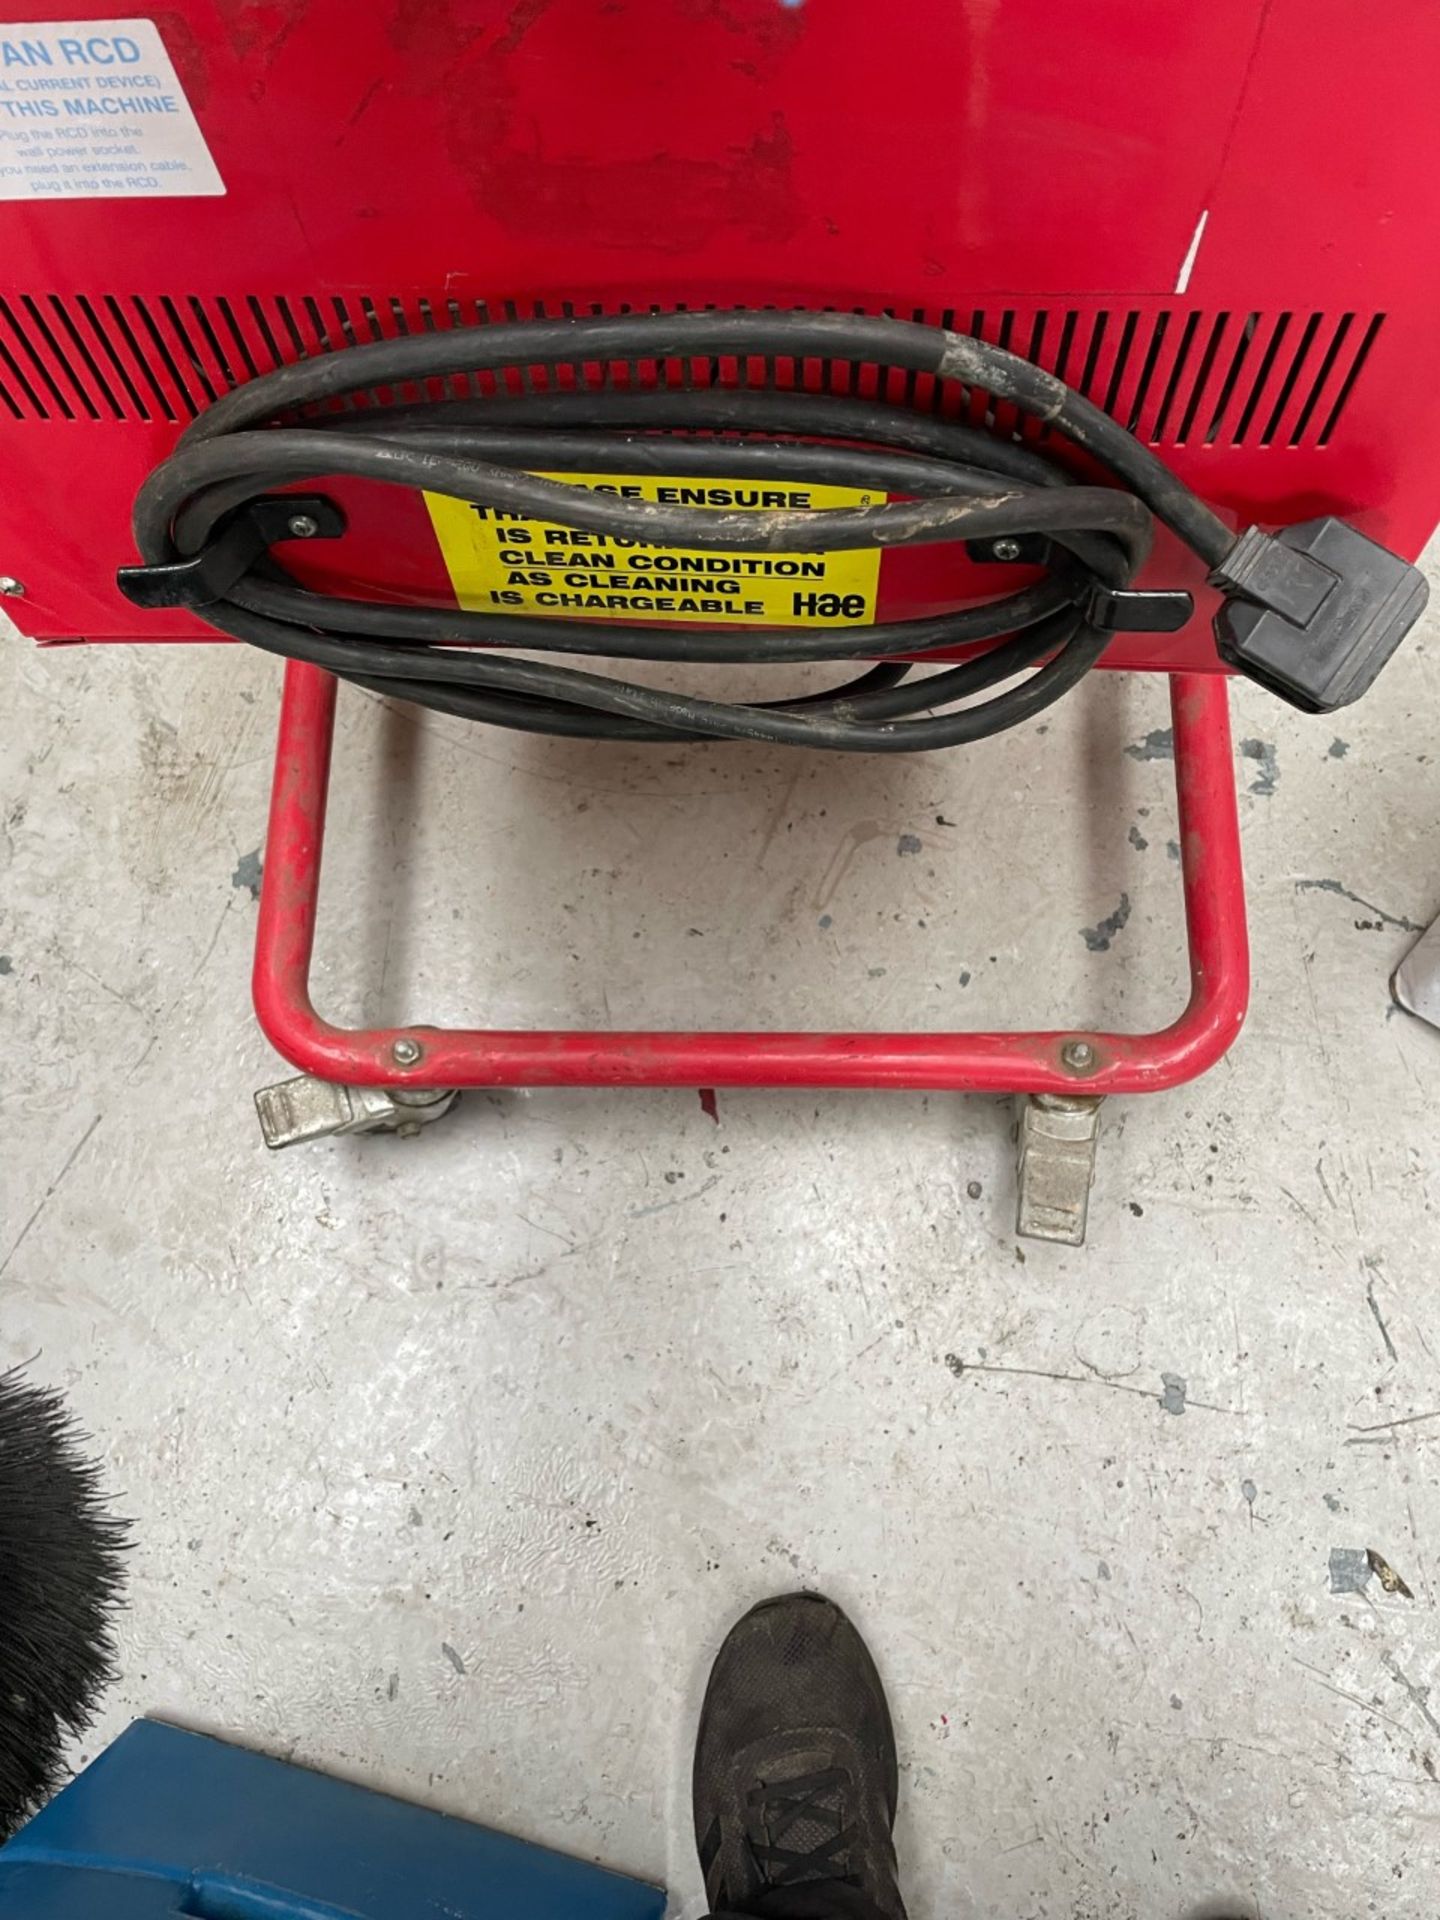 230v heater on stand and wheels. Working - Image 2 of 2